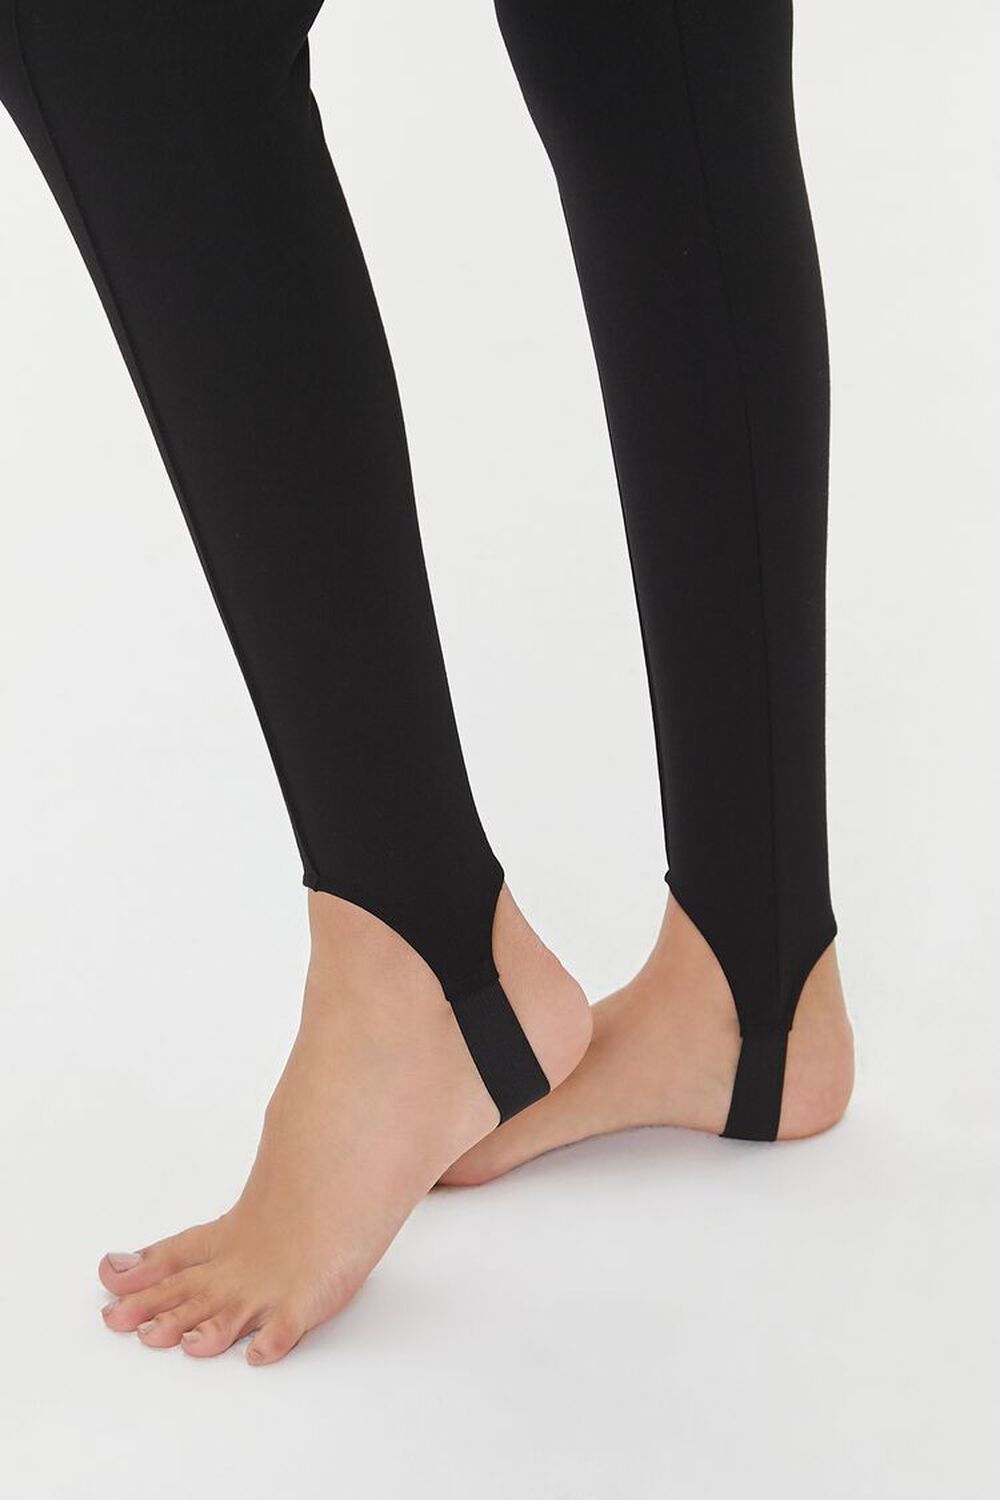 Shop Blair for comfortable women's stirrup pants today! These stirrup  leggings are perfect for exercise or casual w…